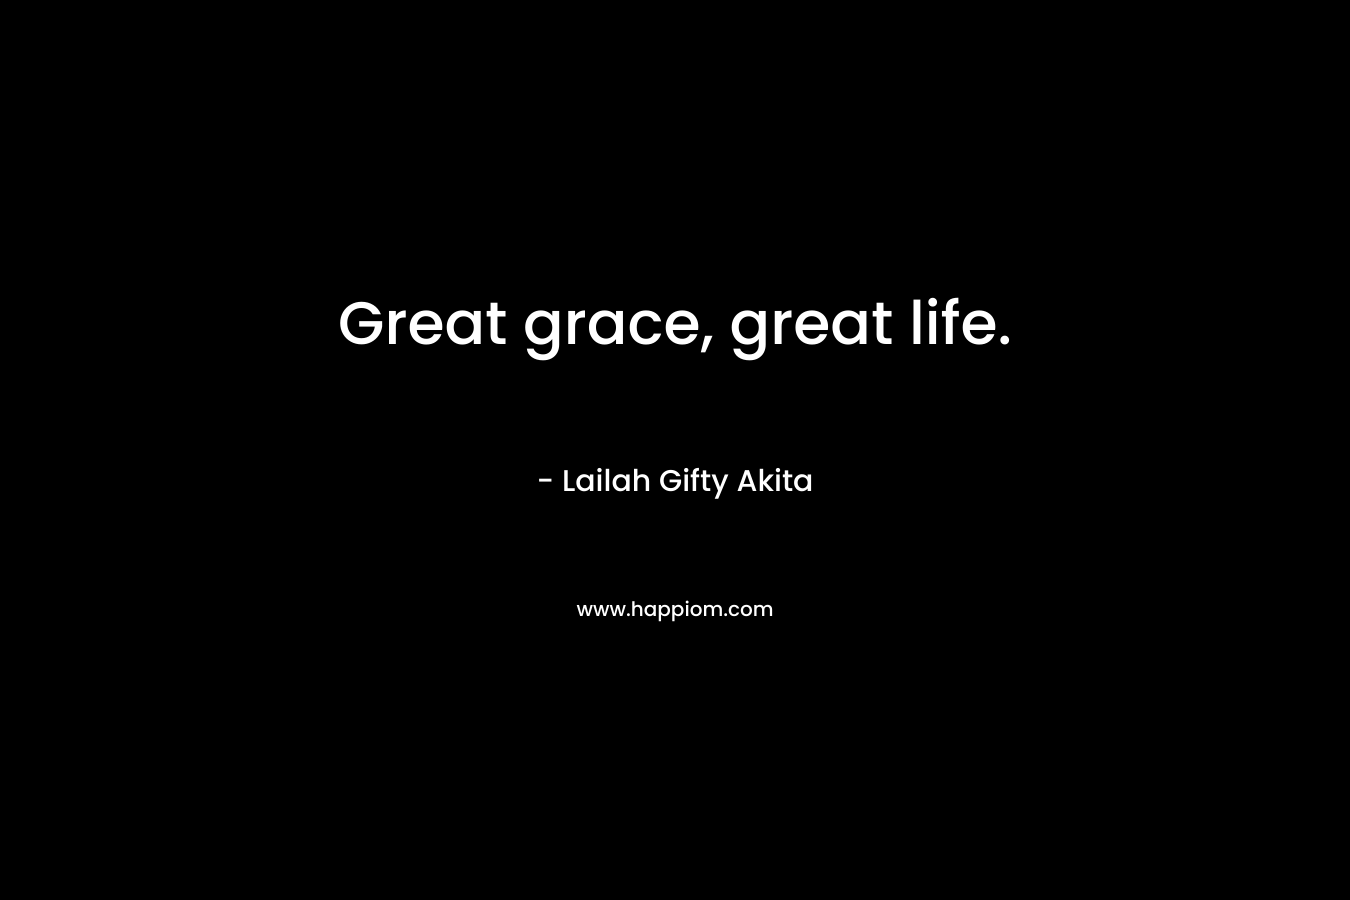 Great grace, great life.